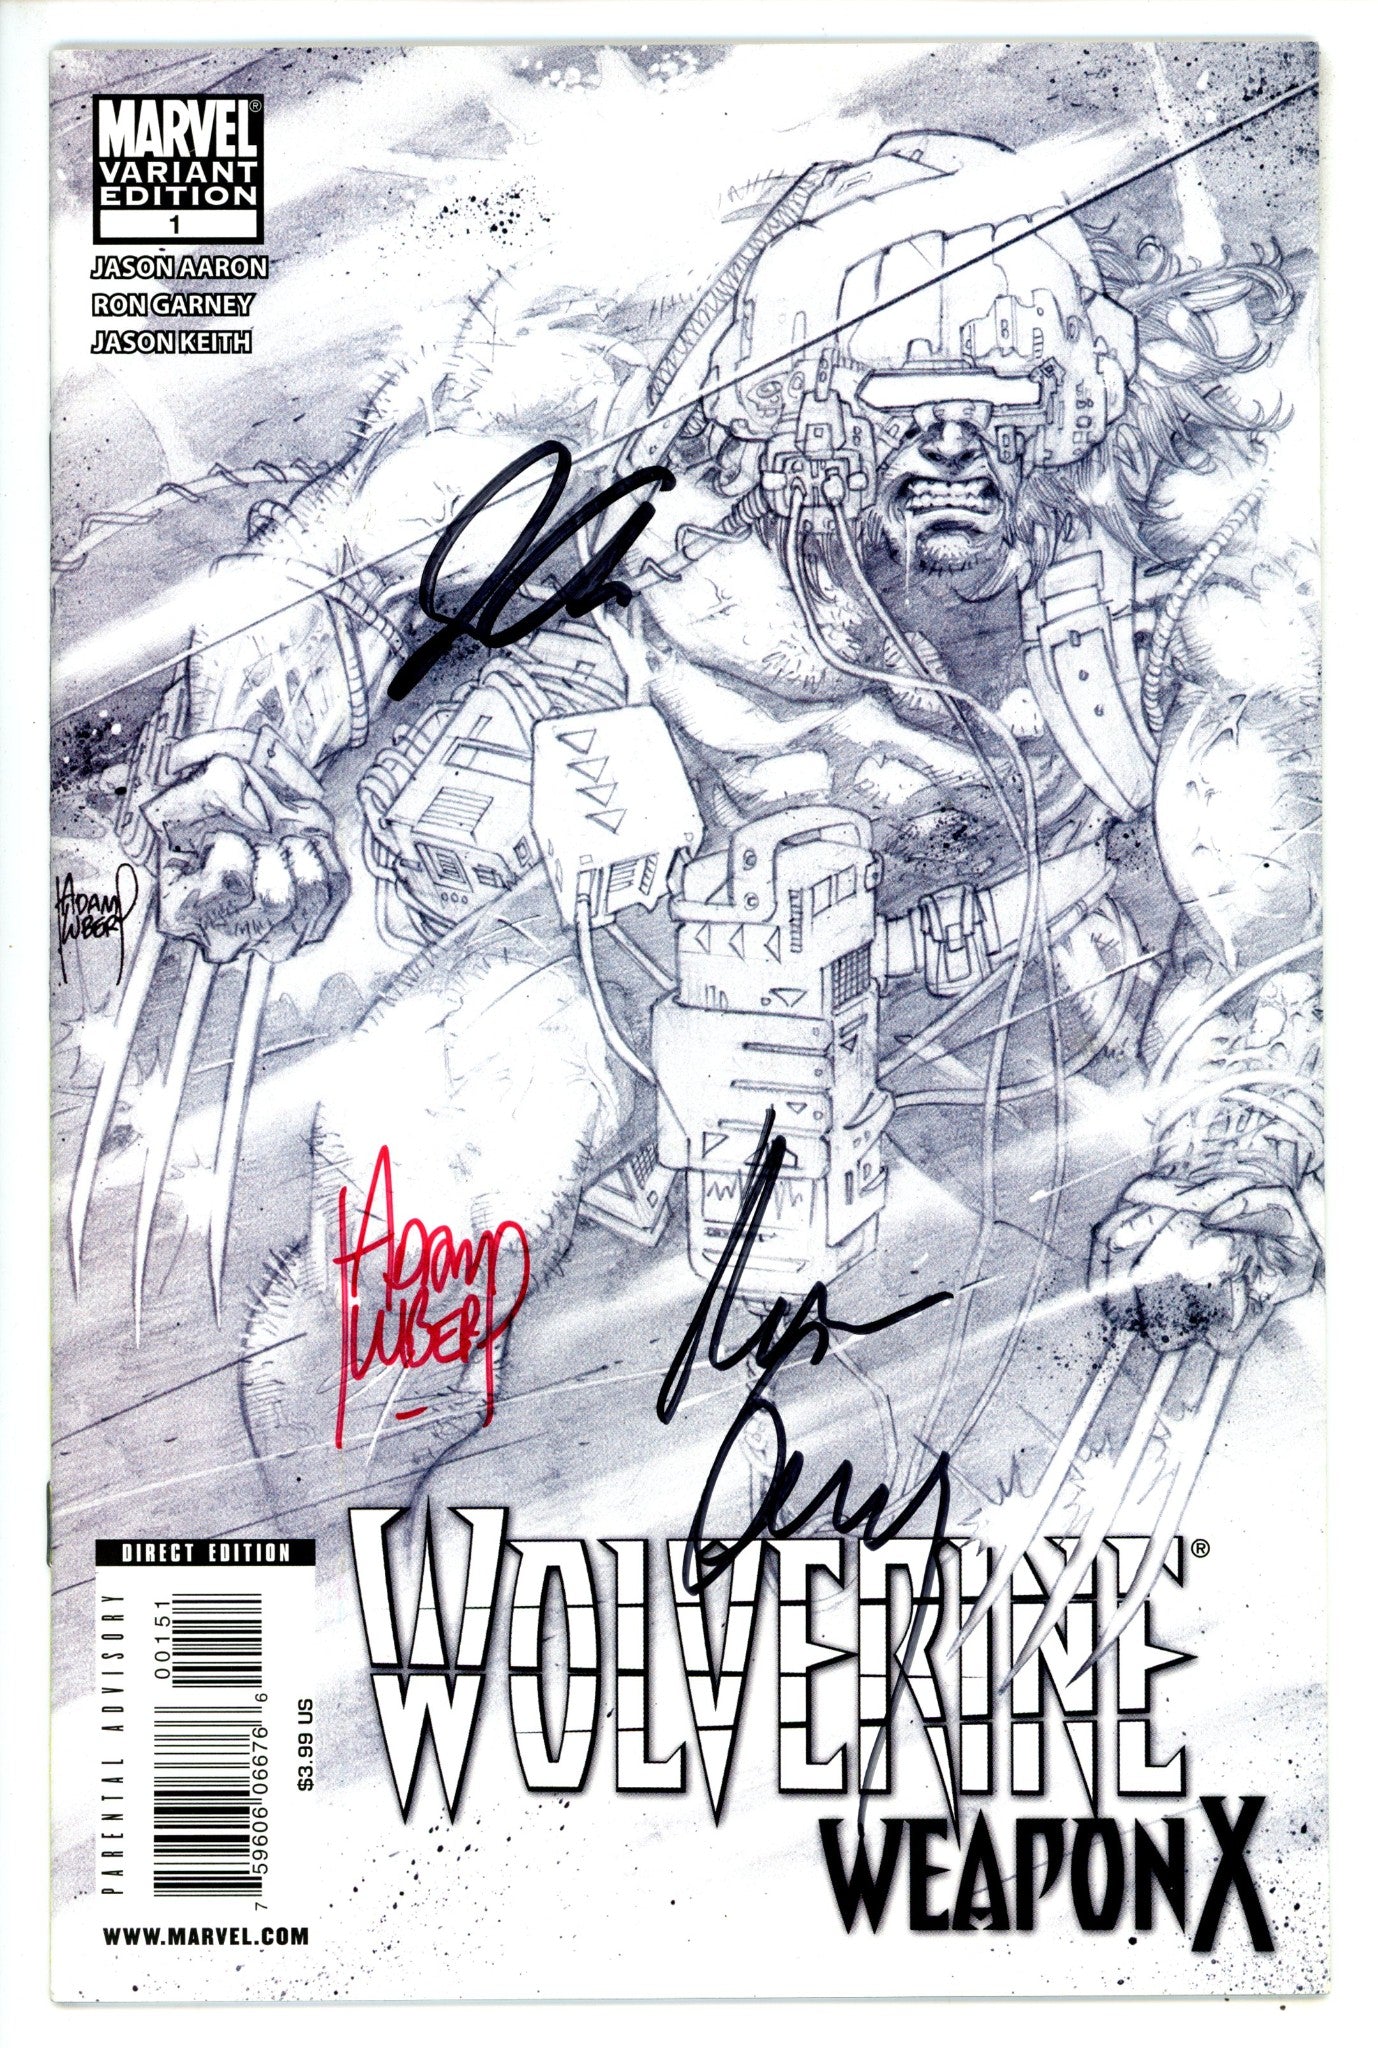 Wolverine Weapon X 1 Variant Signed Kubert, Aaron, and Garney VF